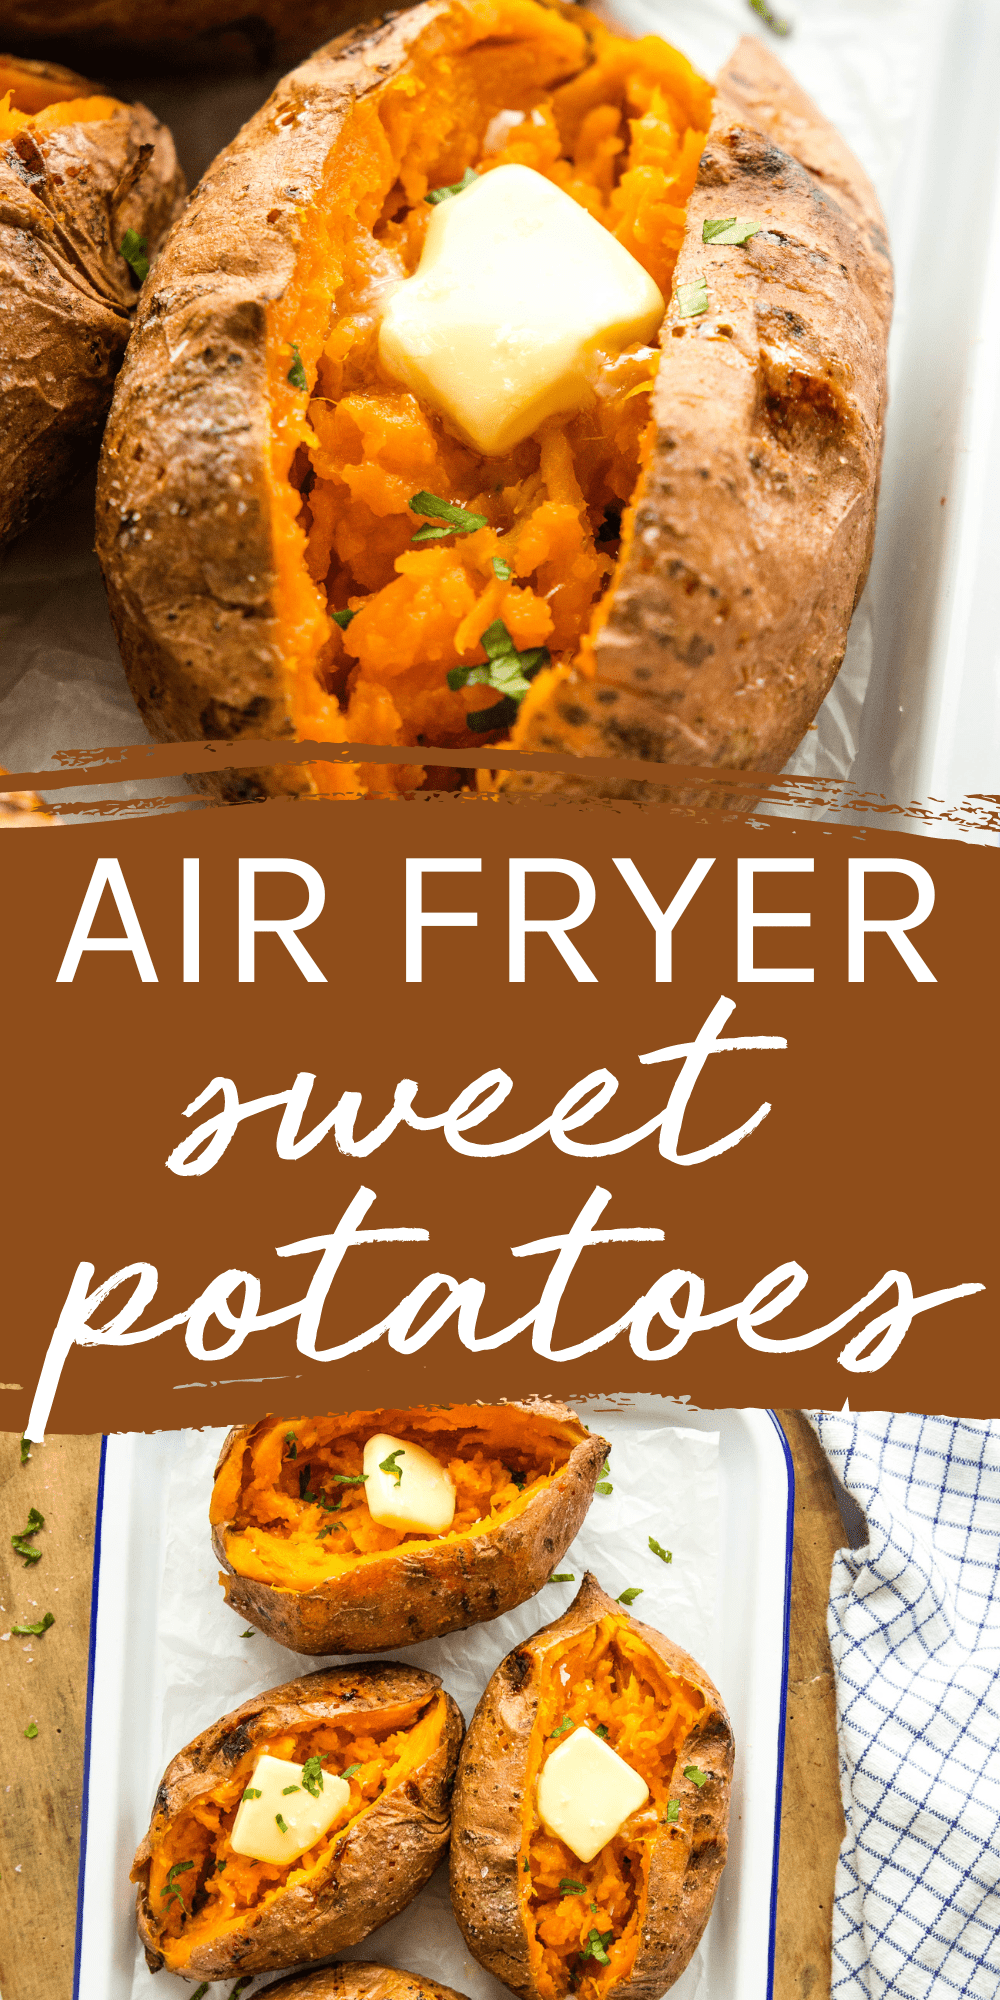 This Air Fryer Baked Sweet Potato Recipe is the best simple side dish - crispy skins, perfectly moist and fluffy sweet potato interior. A quick and easy recipe! Recipe from thebusybaker.ca! #bakedsweetpotato #bakedsweetpotatoes #airfryersweetpotatoes #airfryerbakedsweetpotatoes #easysidedish #simplesidedish #healthy #health #plantbased #vegan #vegetarian via @busybakerblog